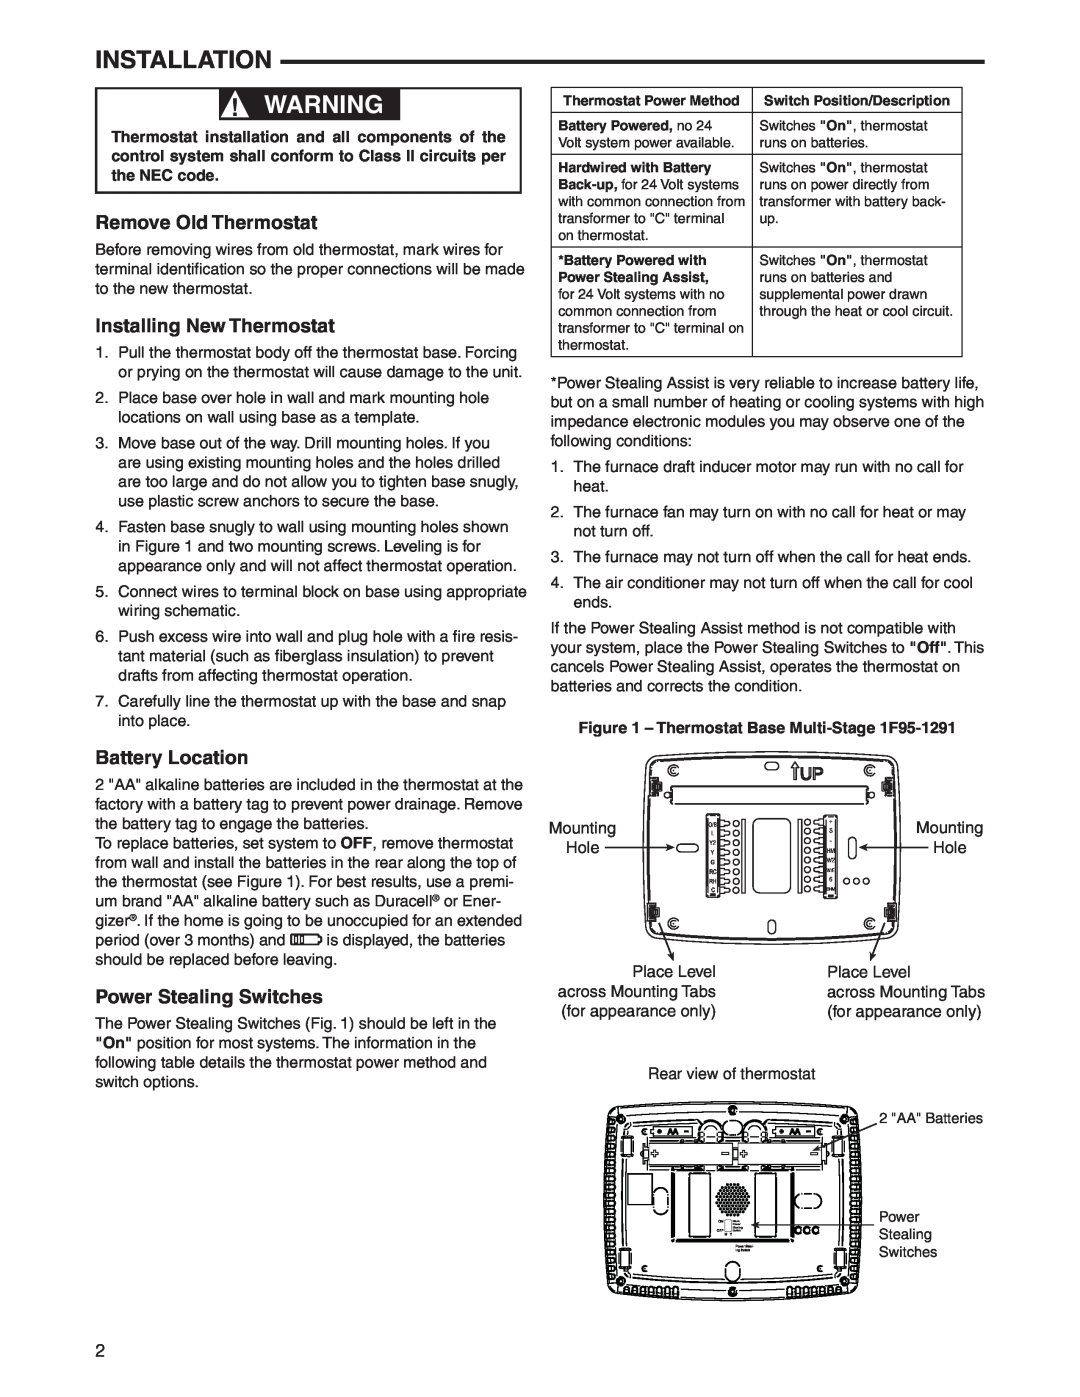 White Rodgers 1F95-1291 specifications Installation, Remove Old Thermostat, Installing New Thermostat, Battery Location 